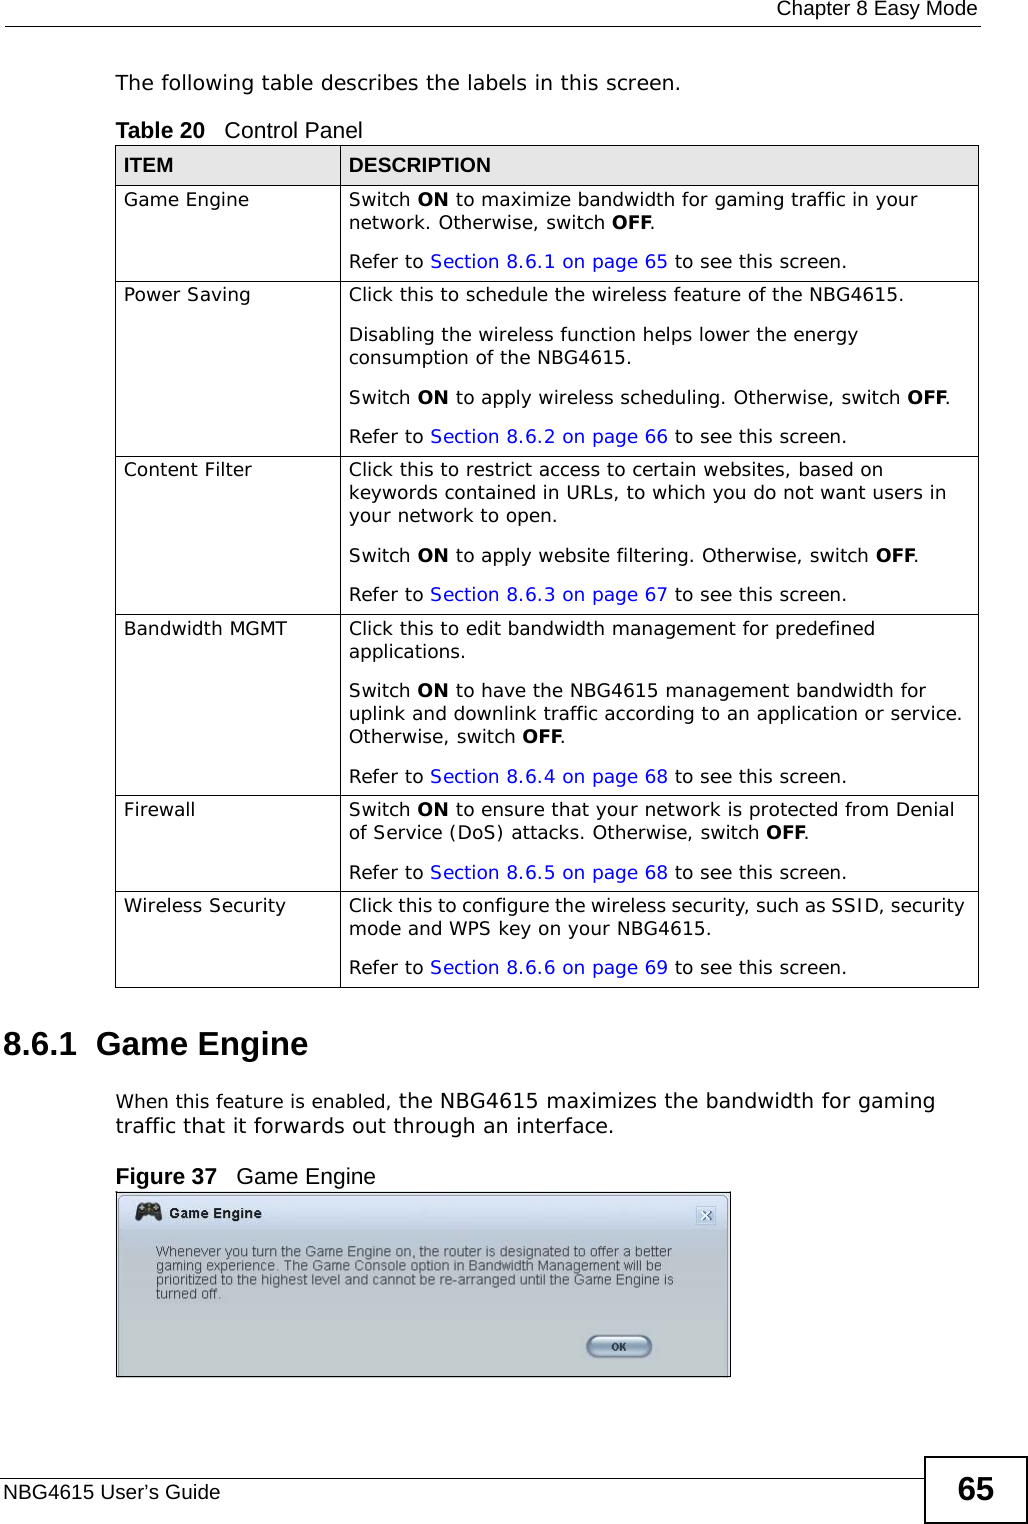  Chapter 8 Easy ModeNBG4615 User’s Guide 65The following table describes the labels in this screen. 8.6.1  Game EngineWhen this feature is enabled, the NBG4615 maximizes the bandwidth for gaming traffic that it forwards out through an interface.Figure 37   Game EngineTable 20   Control PanelITEM DESCRIPTIONGame Engine Switch ON to maximize bandwidth for gaming traffic in your network. Otherwise, switch OFF.Refer to Section 8.6.1 on page 65 to see this screen.Power Saving Click this to schedule the wireless feature of the NBG4615. Disabling the wireless function helps lower the energy consumption of the NBG4615. Switch ON to apply wireless scheduling. Otherwise, switch OFF.Refer to Section 8.6.2 on page 66 to see this screen.Content Filter Click this to restrict access to certain websites, based on keywords contained in URLs, to which you do not want users in your network to open. Switch ON to apply website filtering. Otherwise, switch OFF.Refer to Section 8.6.3 on page 67 to see this screen.Bandwidth MGMT Click this to edit bandwidth management for predefined applications. Switch ON to have the NBG4615 management bandwidth for uplink and downlink traffic according to an application or service. Otherwise, switch OFF.Refer to Section 8.6.4 on page 68 to see this screen.Firewall Switch ON to ensure that your network is protected from Denial of Service (DoS) attacks. Otherwise, switch OFF.Refer to Section 8.6.5 on page 68 to see this screen.Wireless Security Click this to configure the wireless security, such as SSID, security mode and WPS key on your NBG4615. Refer to Section 8.6.6 on page 69 to see this screen.